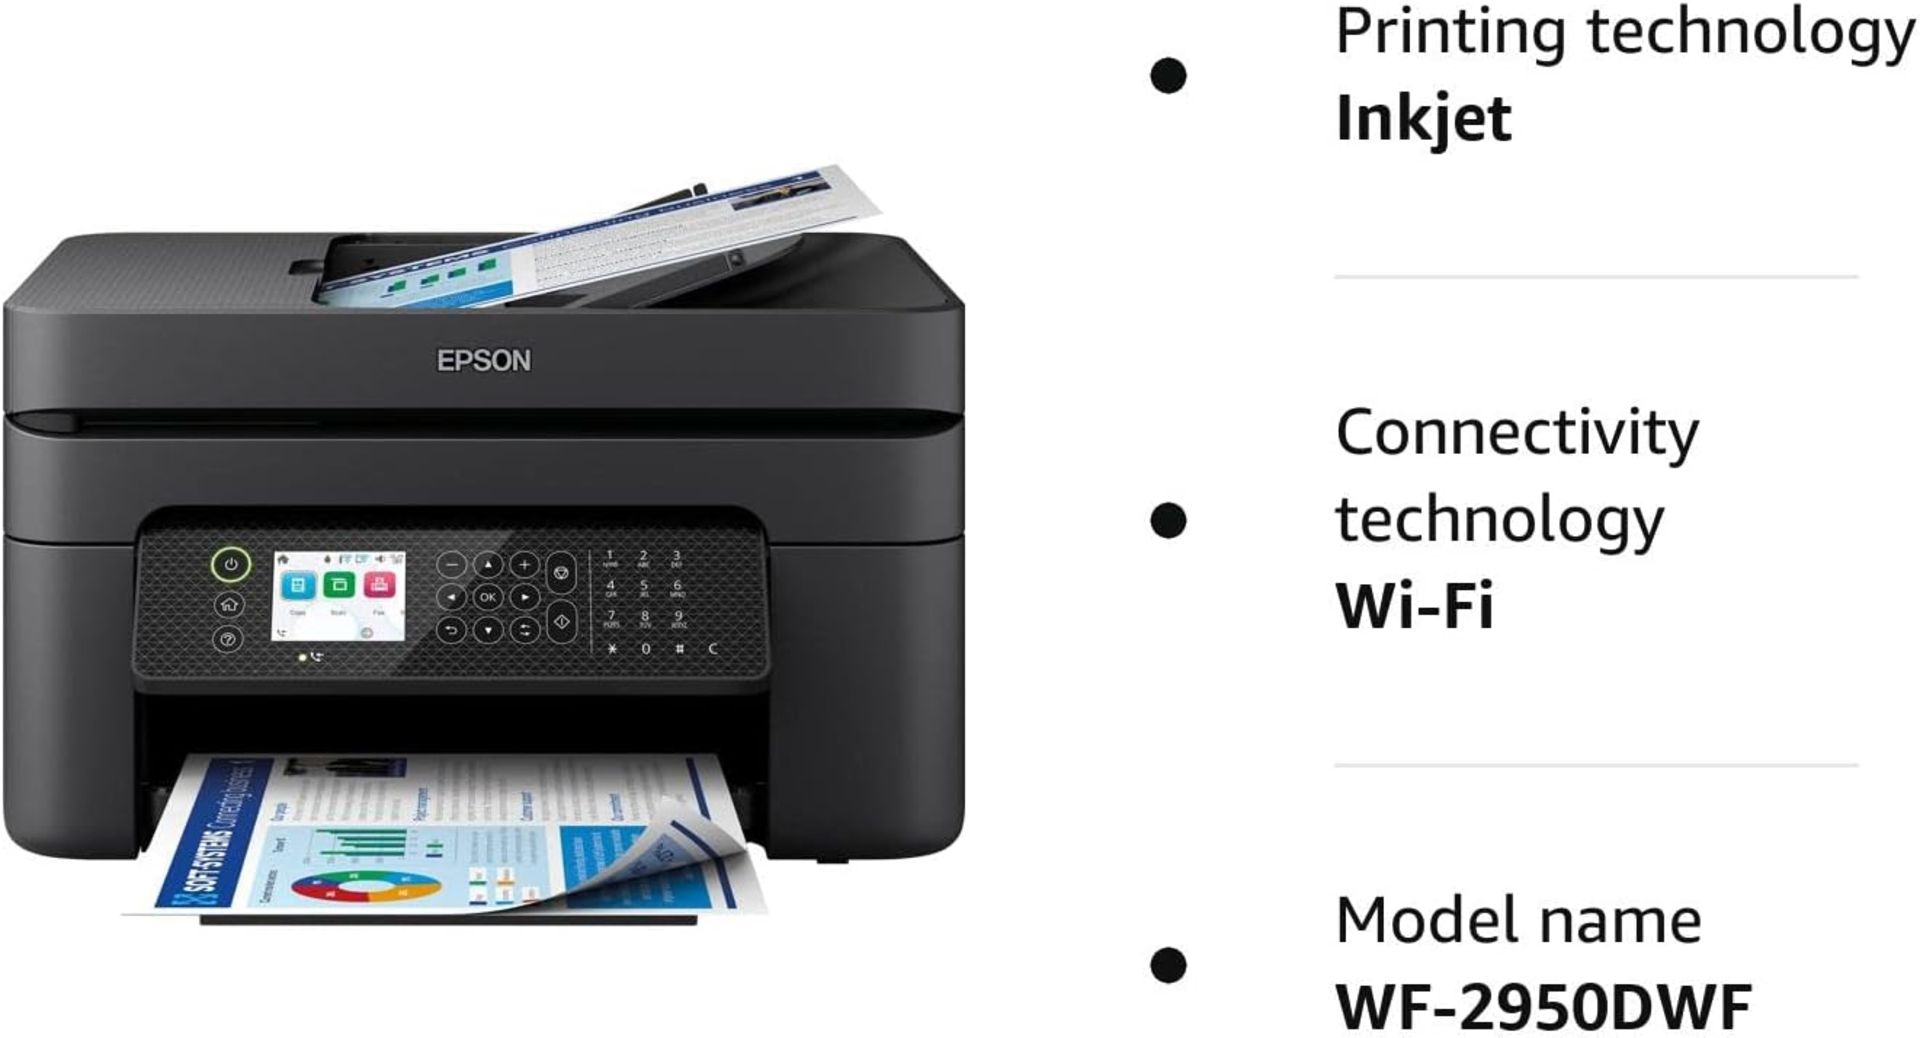 EPSON WF-2950DWF A4 Multifunction Wireless Inkjet Printer. RRP £99.99. (R6R). COMPACT AND - Image 9 of 9